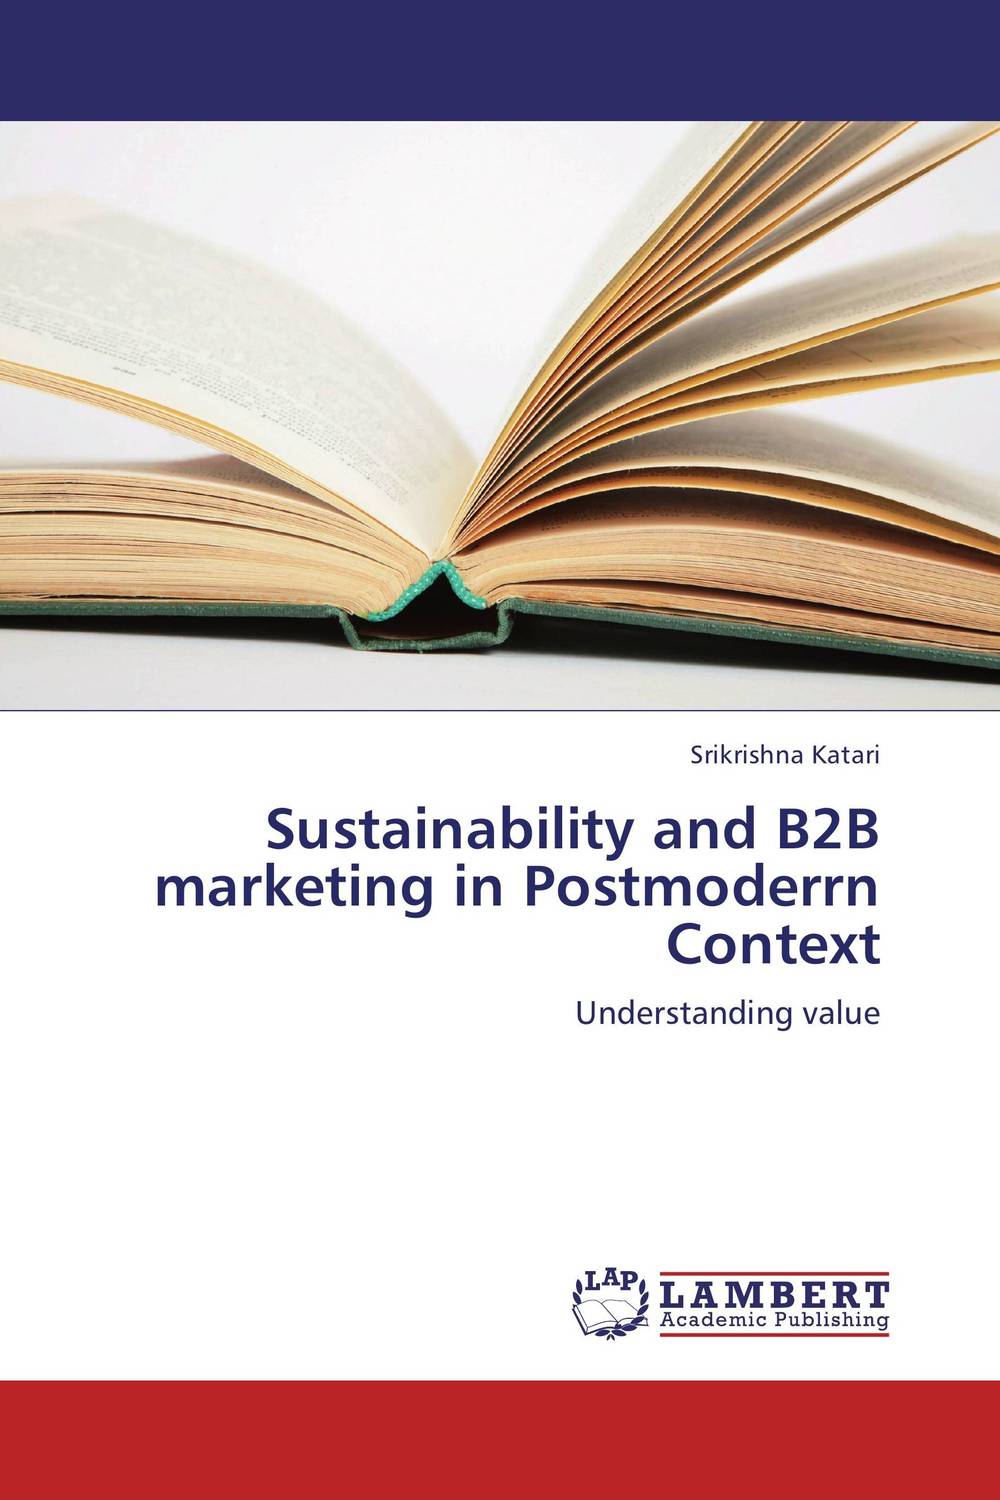 Sustainability and B2B marketing in Postmoderrn Context